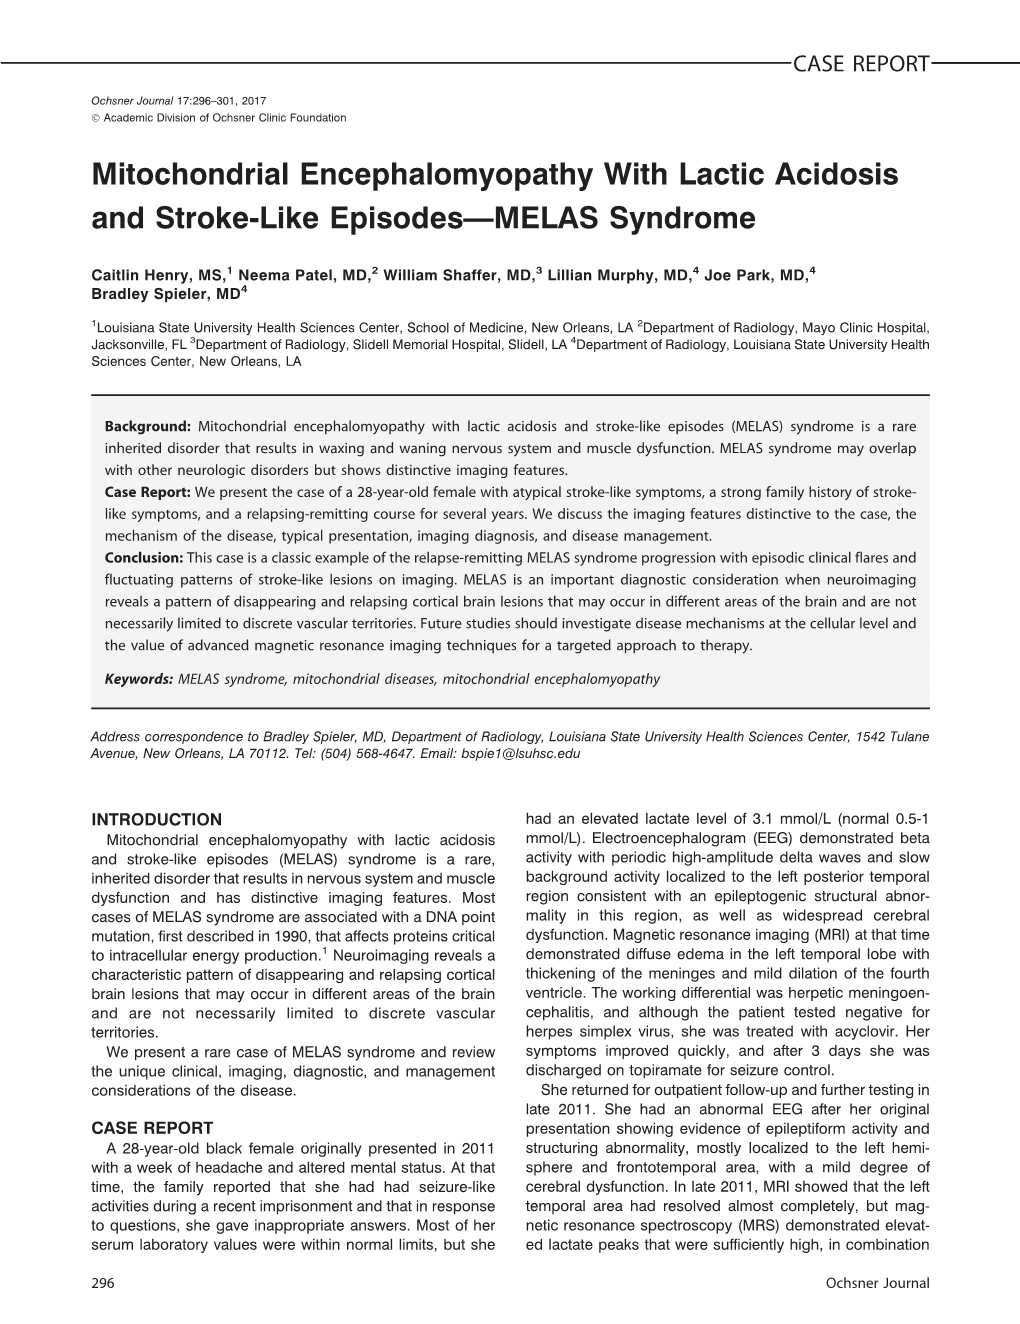 Mitochondrial Encephalomyopathy with Lactic Acidosis and Stroke-Like Episodes—MELAS Syndrome